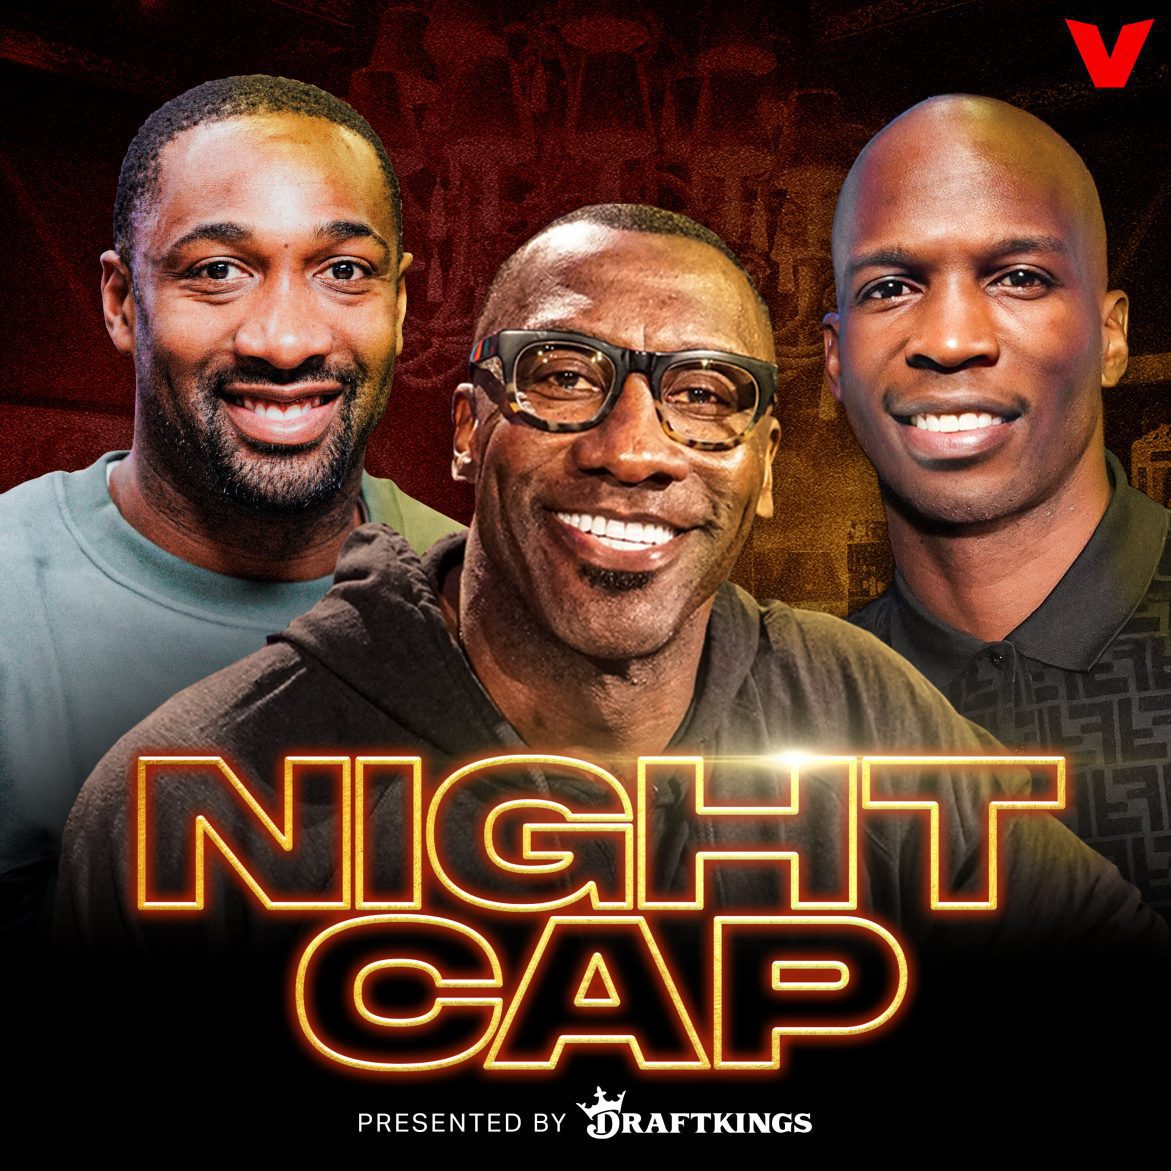 Black Podcasting - Nightcap - Hour 2: Firing Family members, BBLs at airports & why sex isn't a team sport